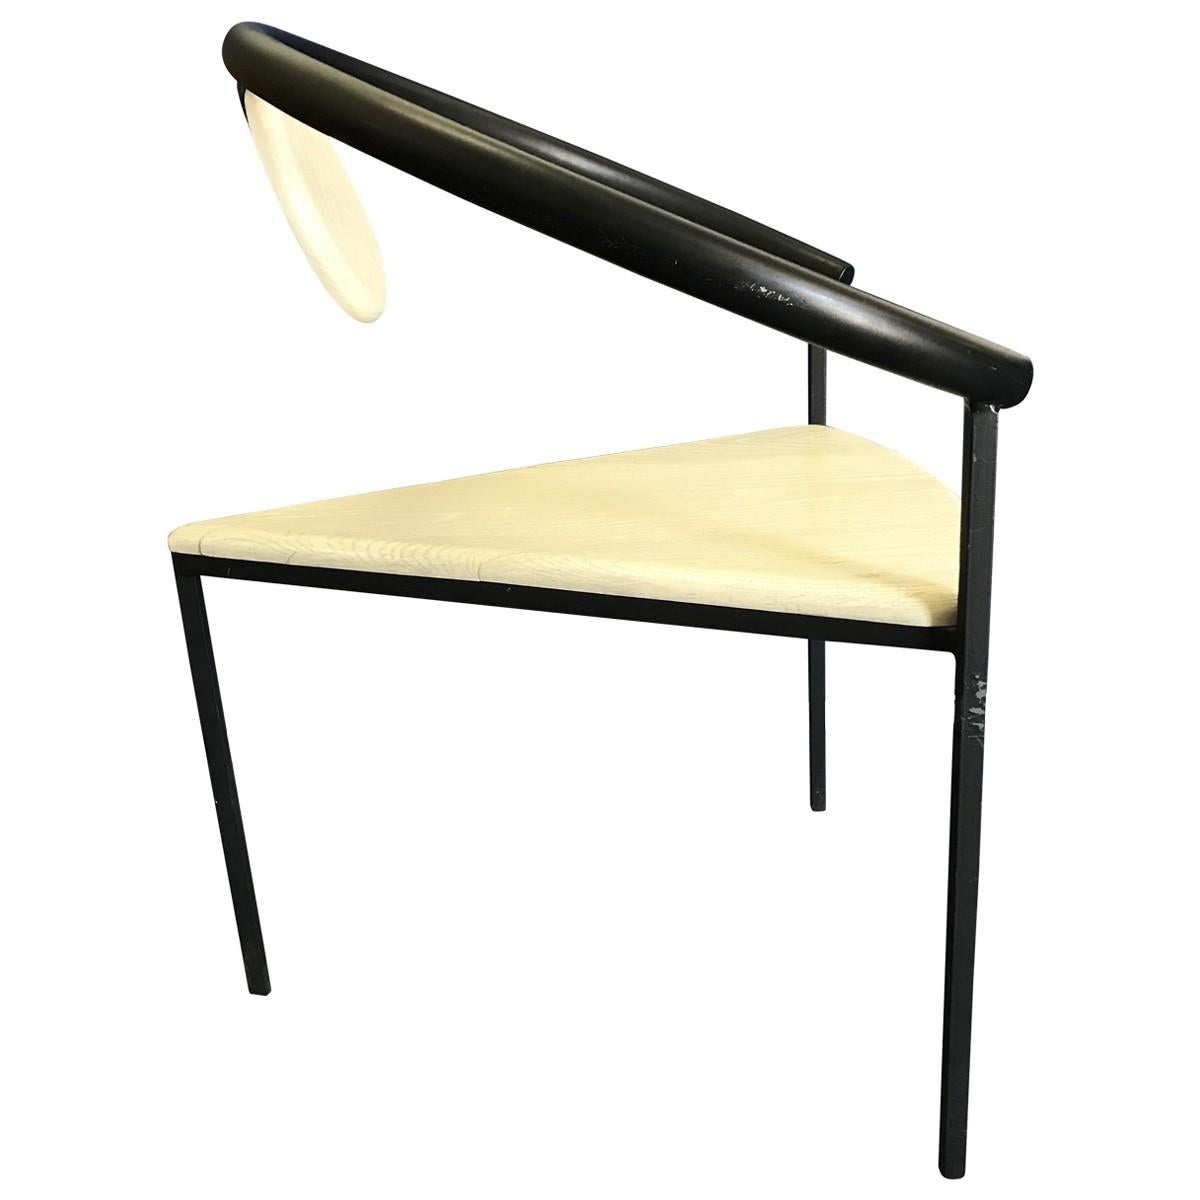 Ivory painted oak seat and backrest.
Black metal curved armrest.
Black square wrought iron legs,.
Measure: Width 26